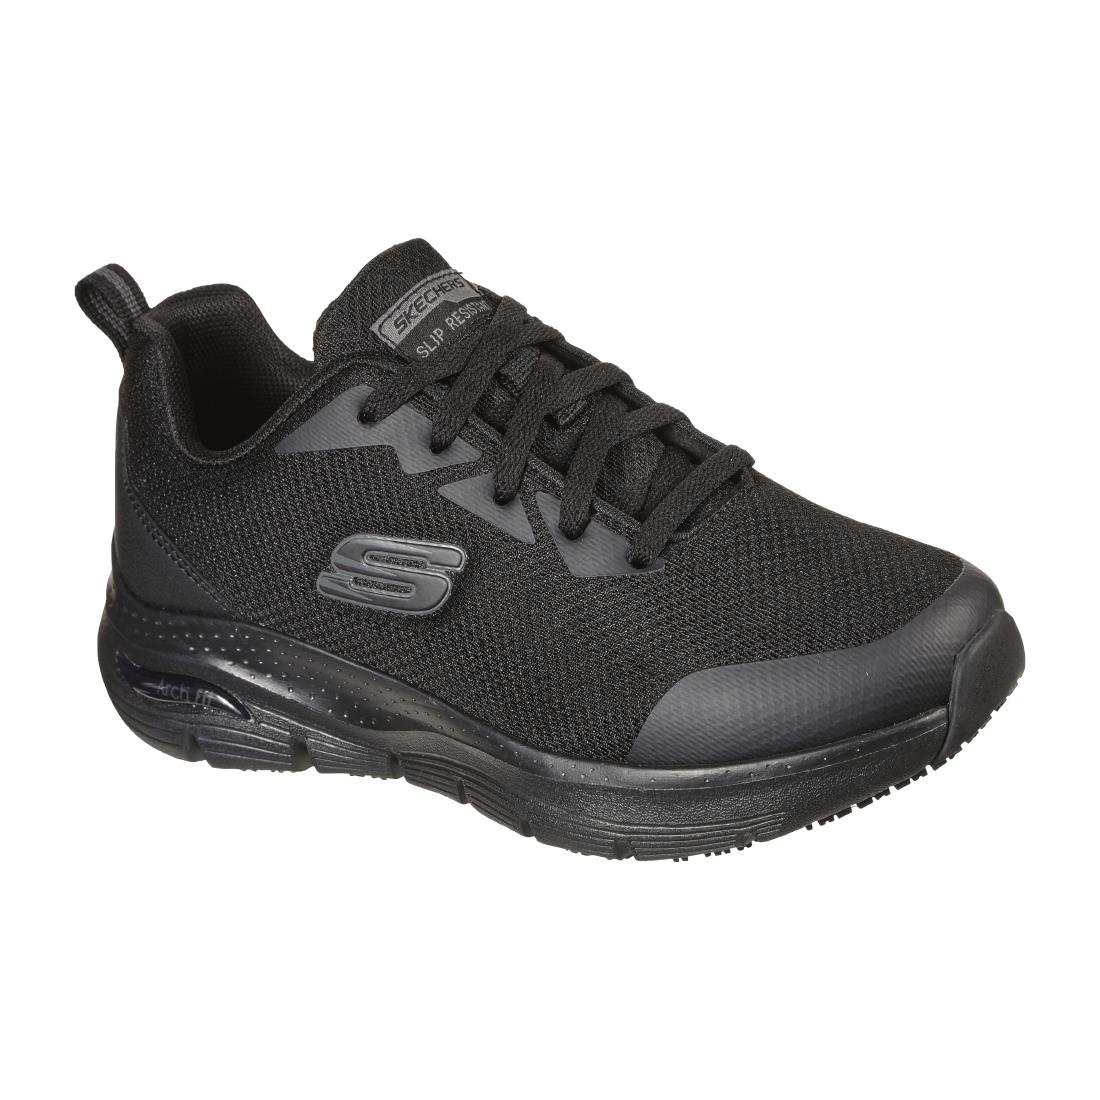 BB671-38 Skechers Womens Slip Resistant Arch Fit Trainer Size 38 JD Catering Equipment Solutions Ltd